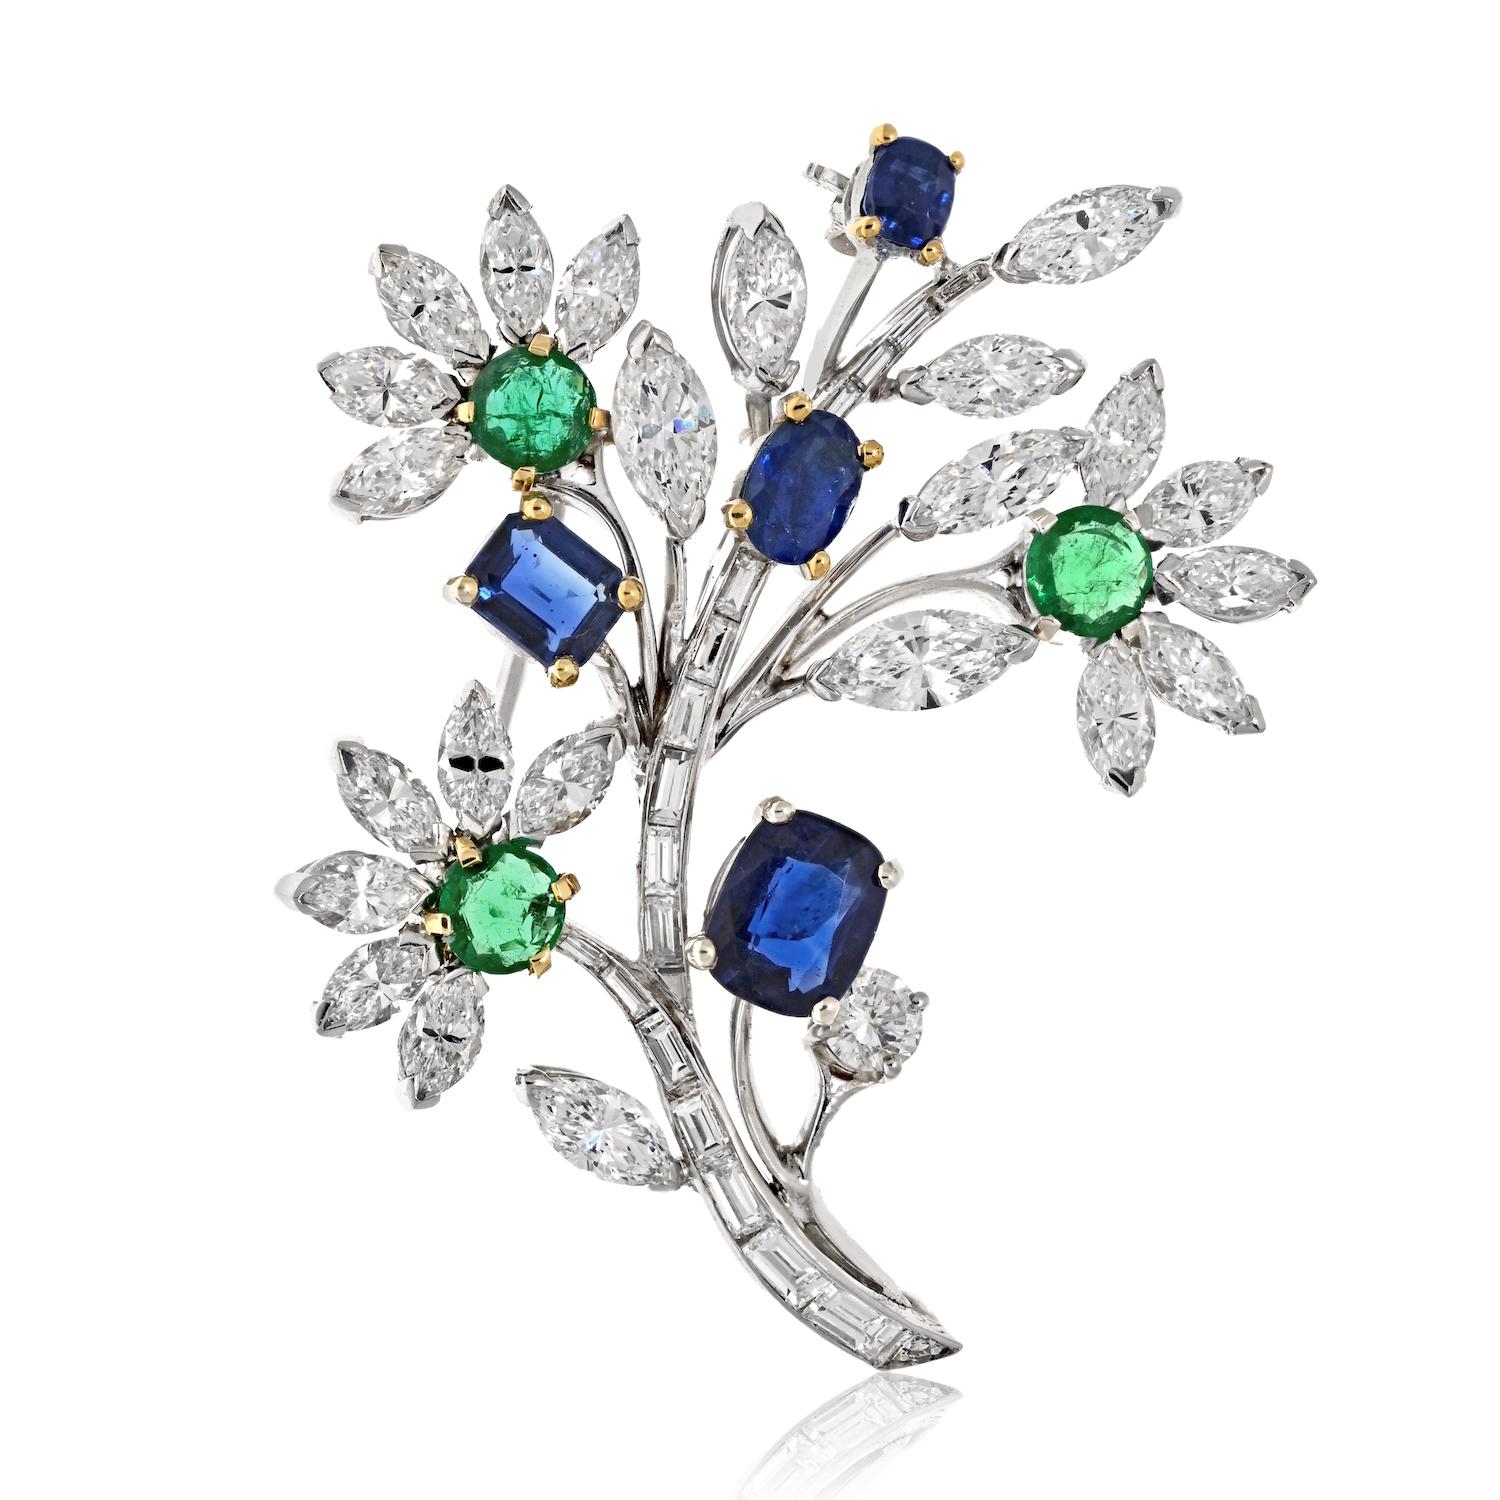 This signed and numbered Van Cleef & Arpels platinum brooch is truly a work of art. The floral motif is beautifully crafted and adorned with diamonds, emeralds, and sapphires. What makes this brooch truly special is that all four of the sapphires